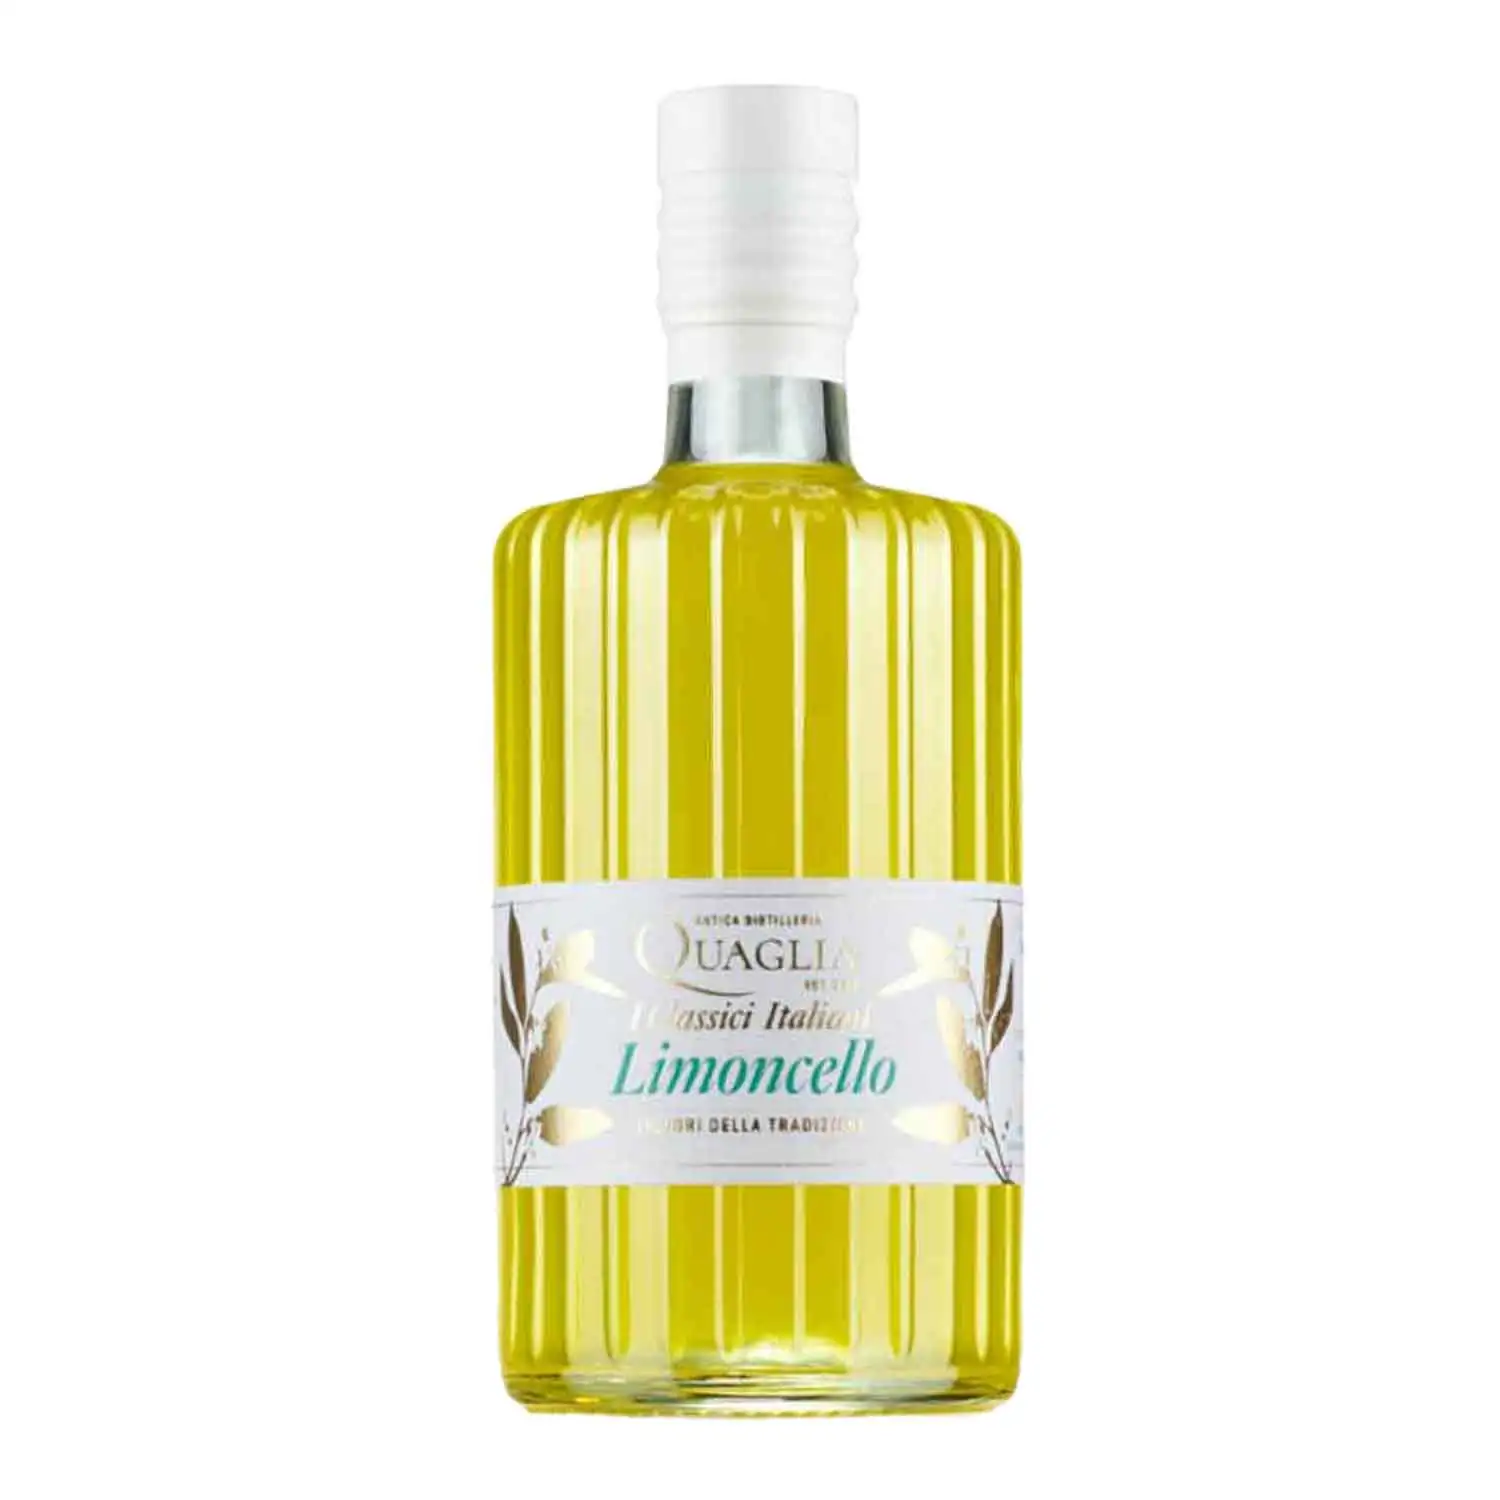 Limoncello 70cl Alc 28% - Buy at Real Tobacco